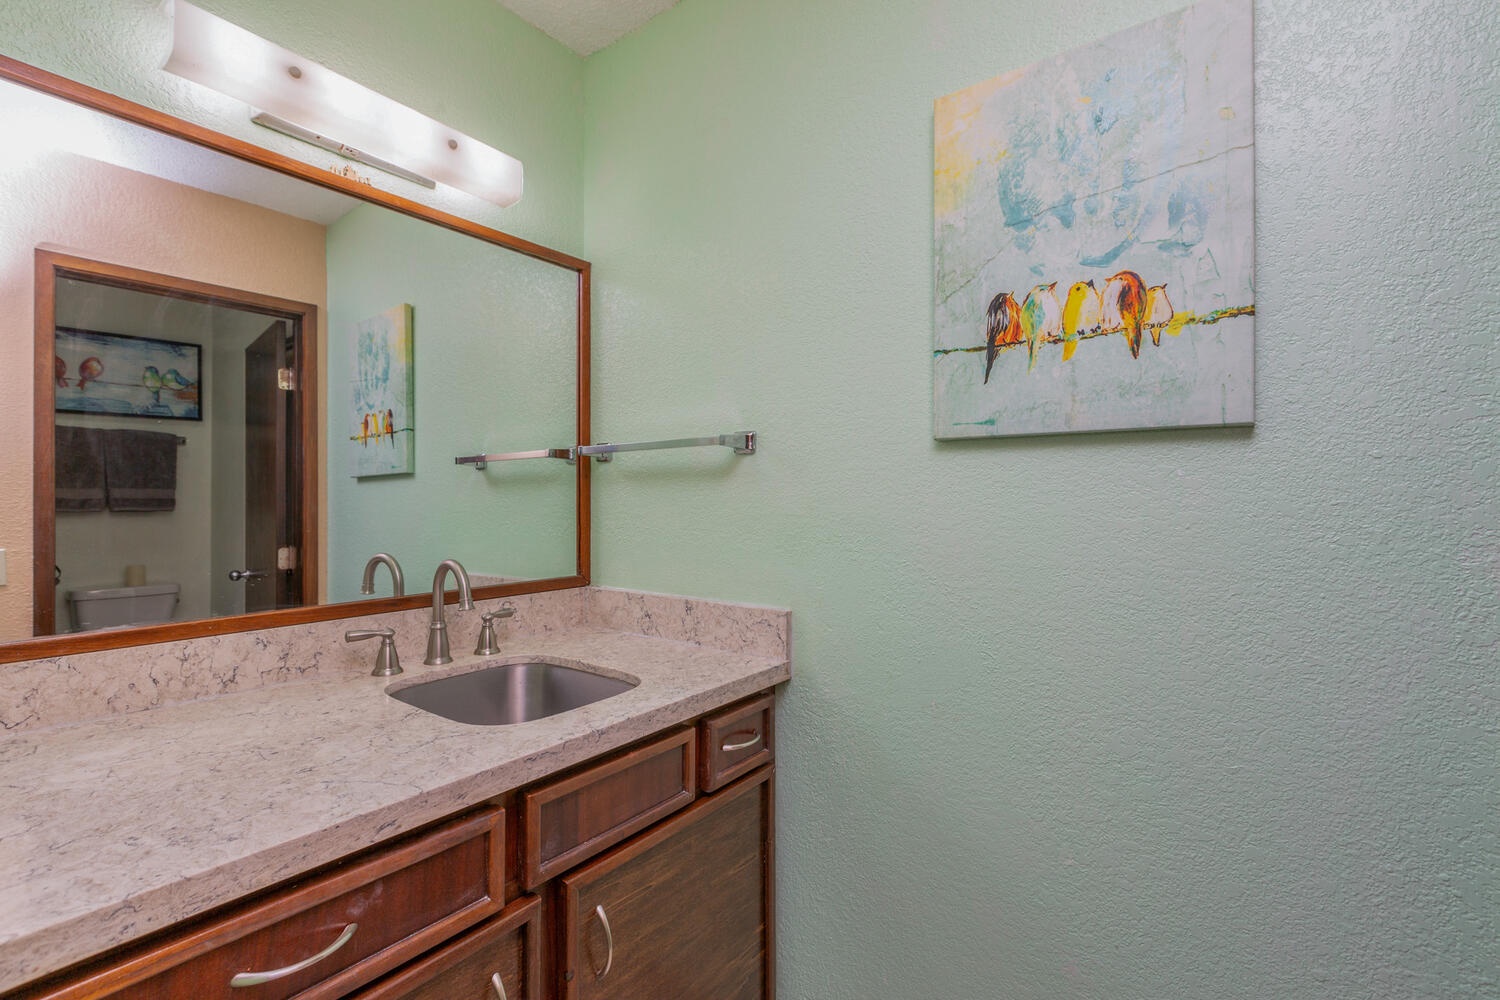 Princeville Vacation Rentals, Hideaway Haven Suite - Ensuite bathroom with a vanity space and a single sink